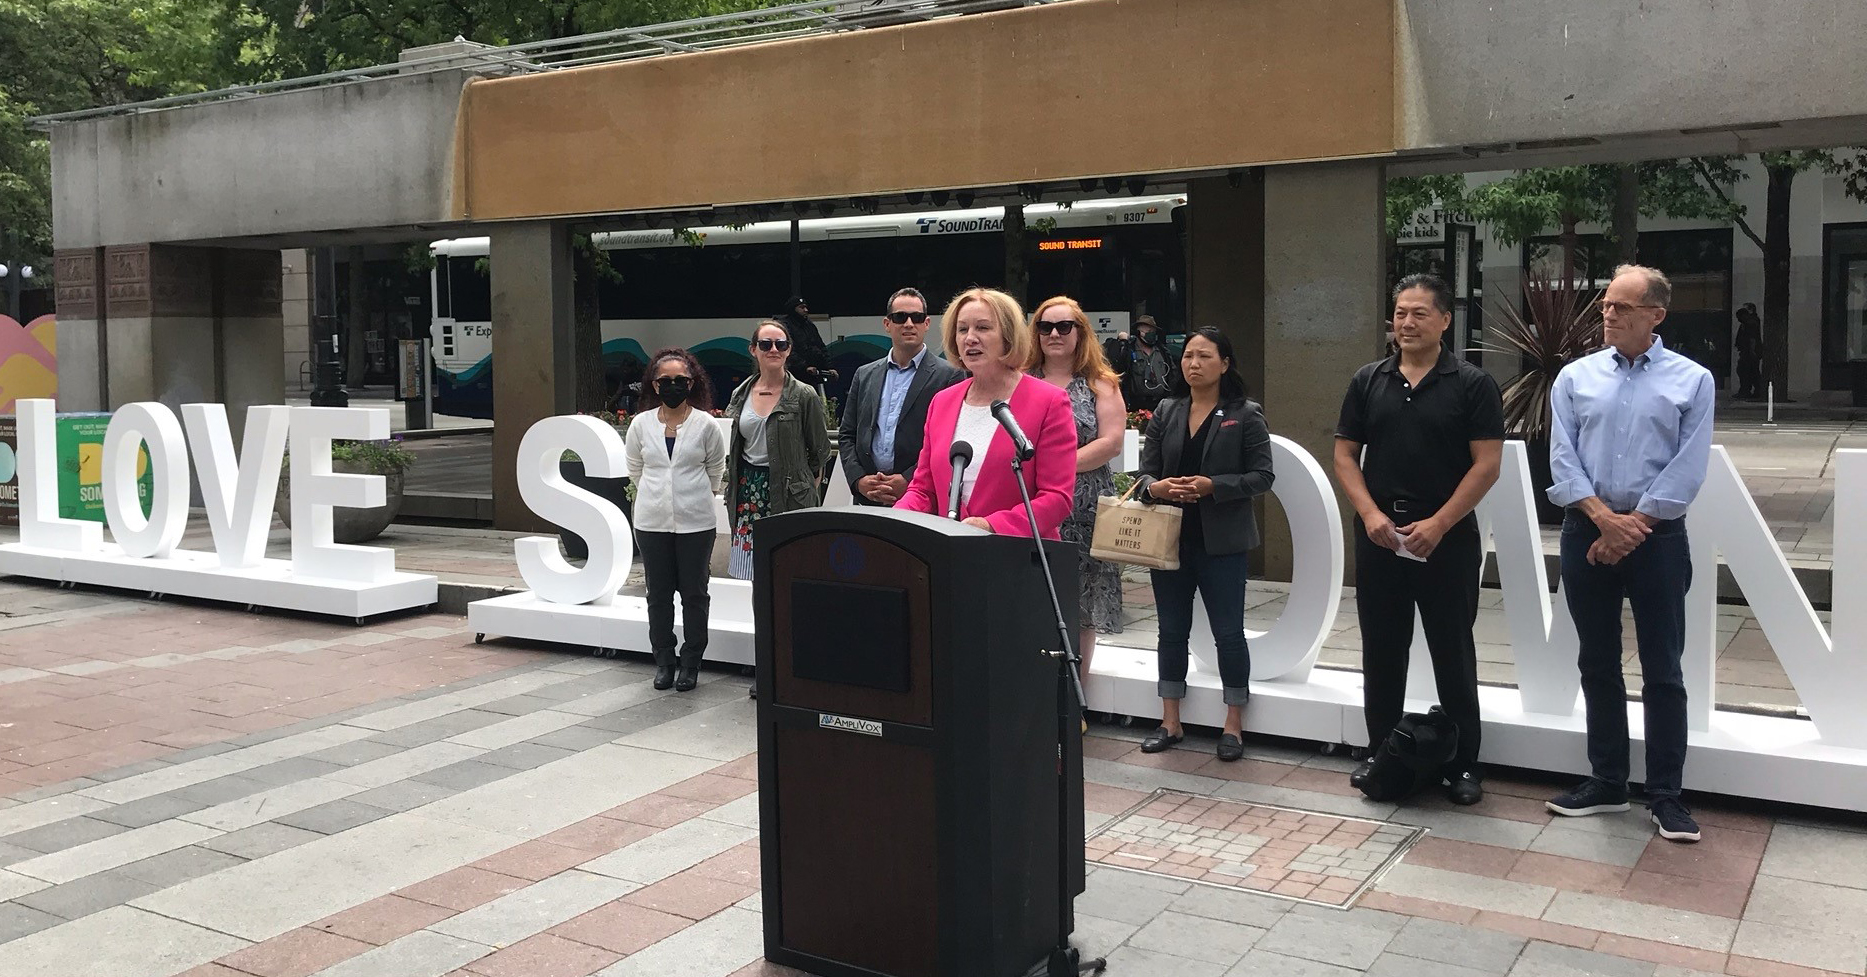 Mayor Durkan speaking at Welcome Back Seattle event